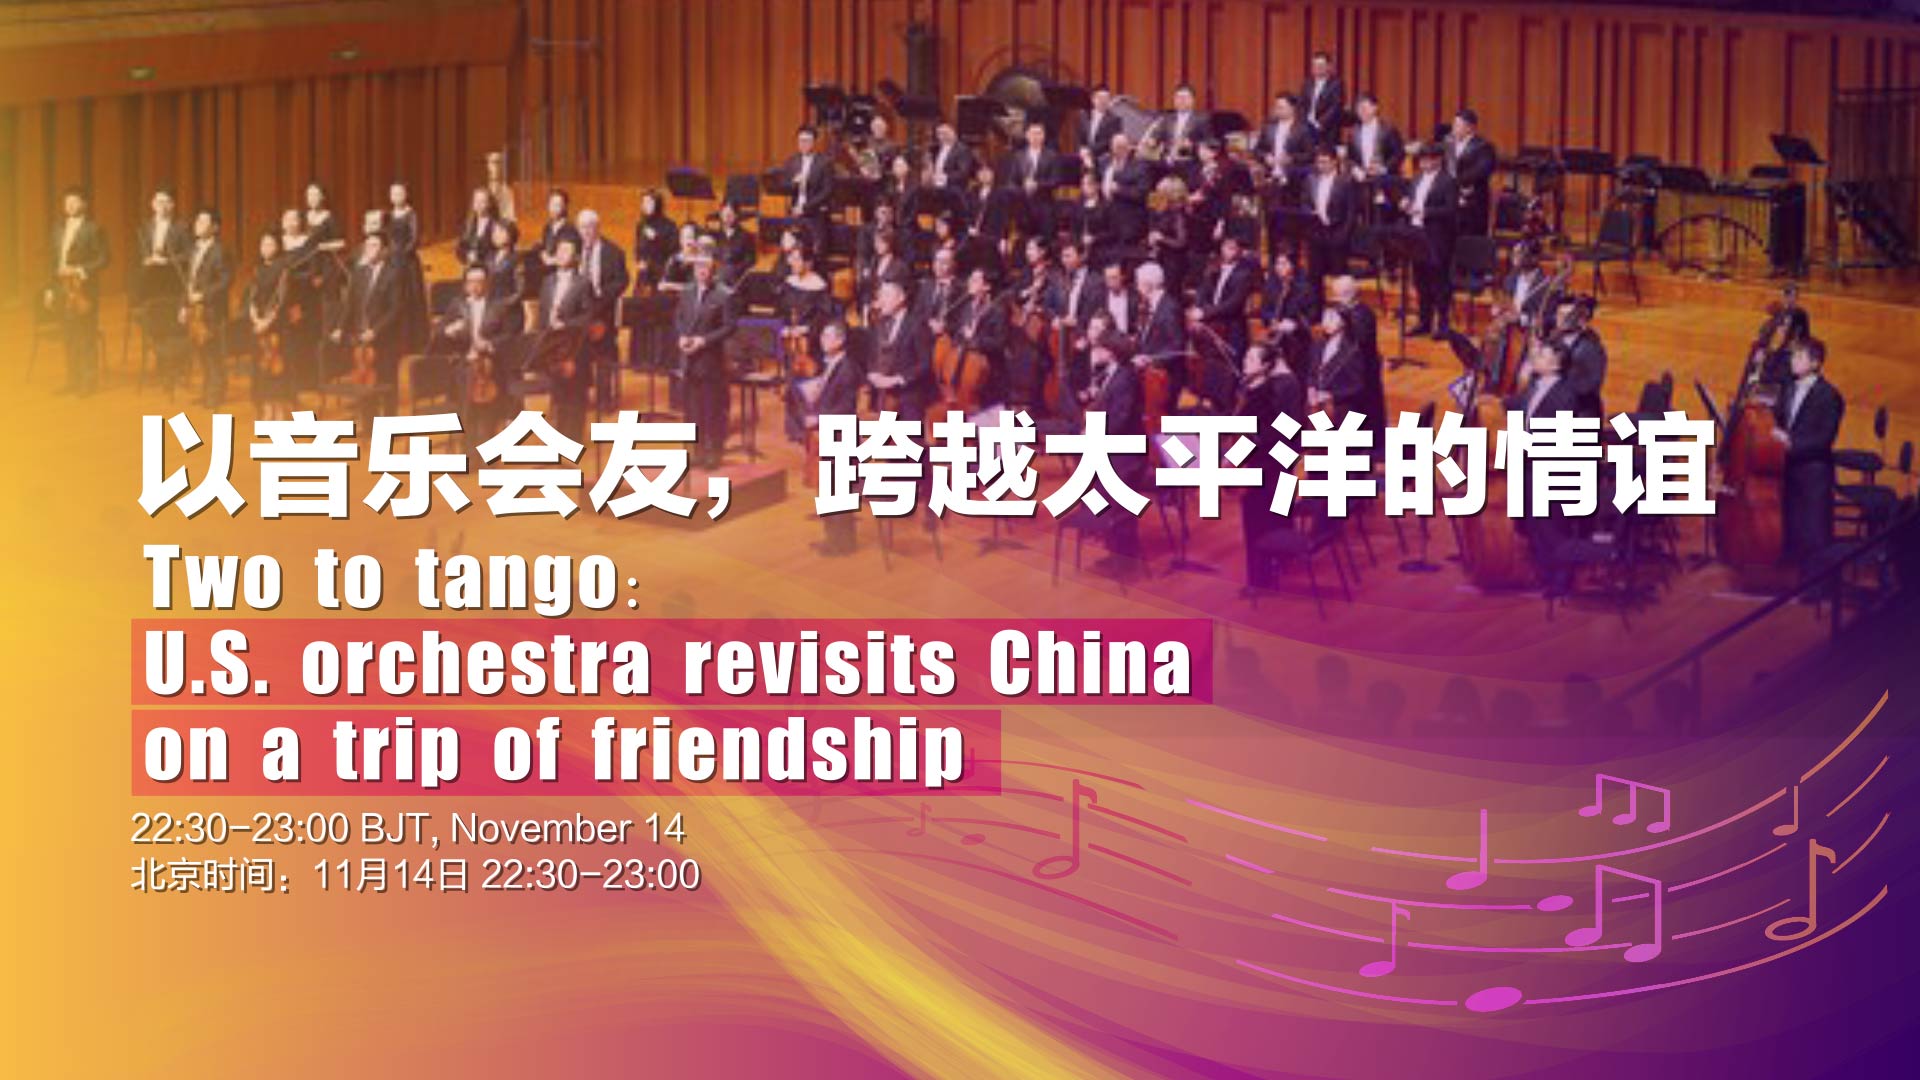 Watch: Two to tango – U.S. orchestra revisits China on a trip of friendship